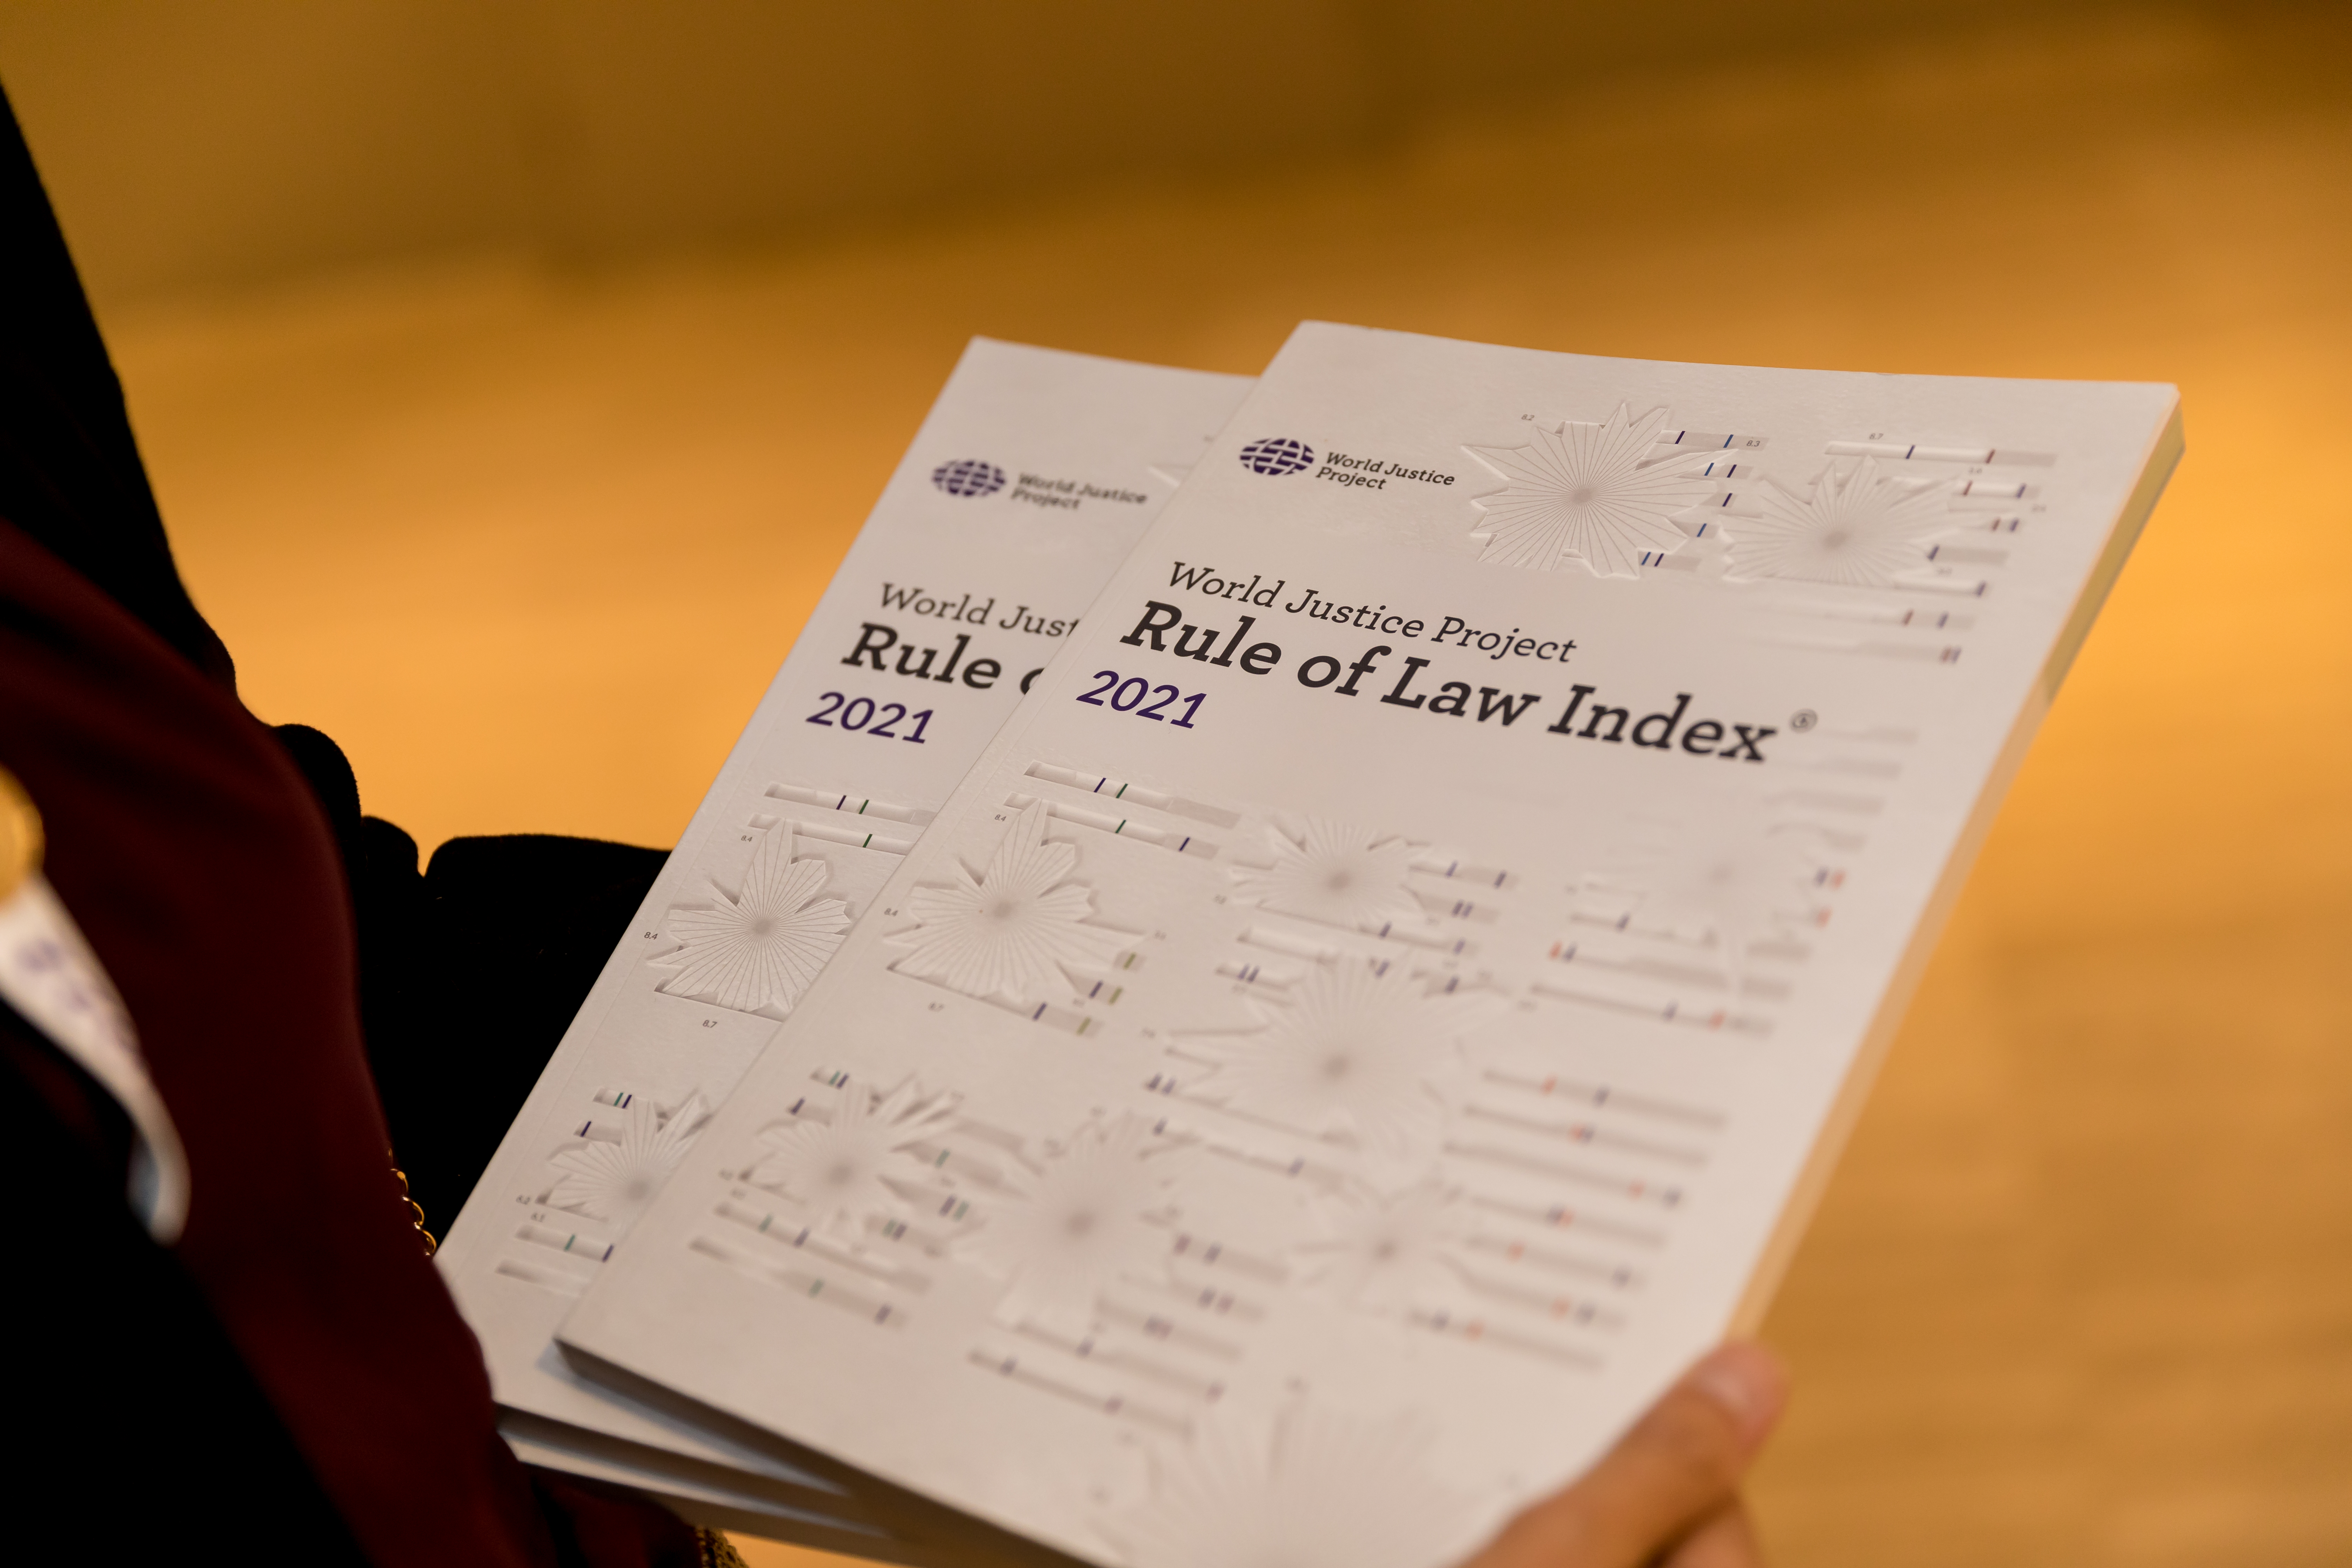 The 2021 edition of the WJP Rule of Law Index 